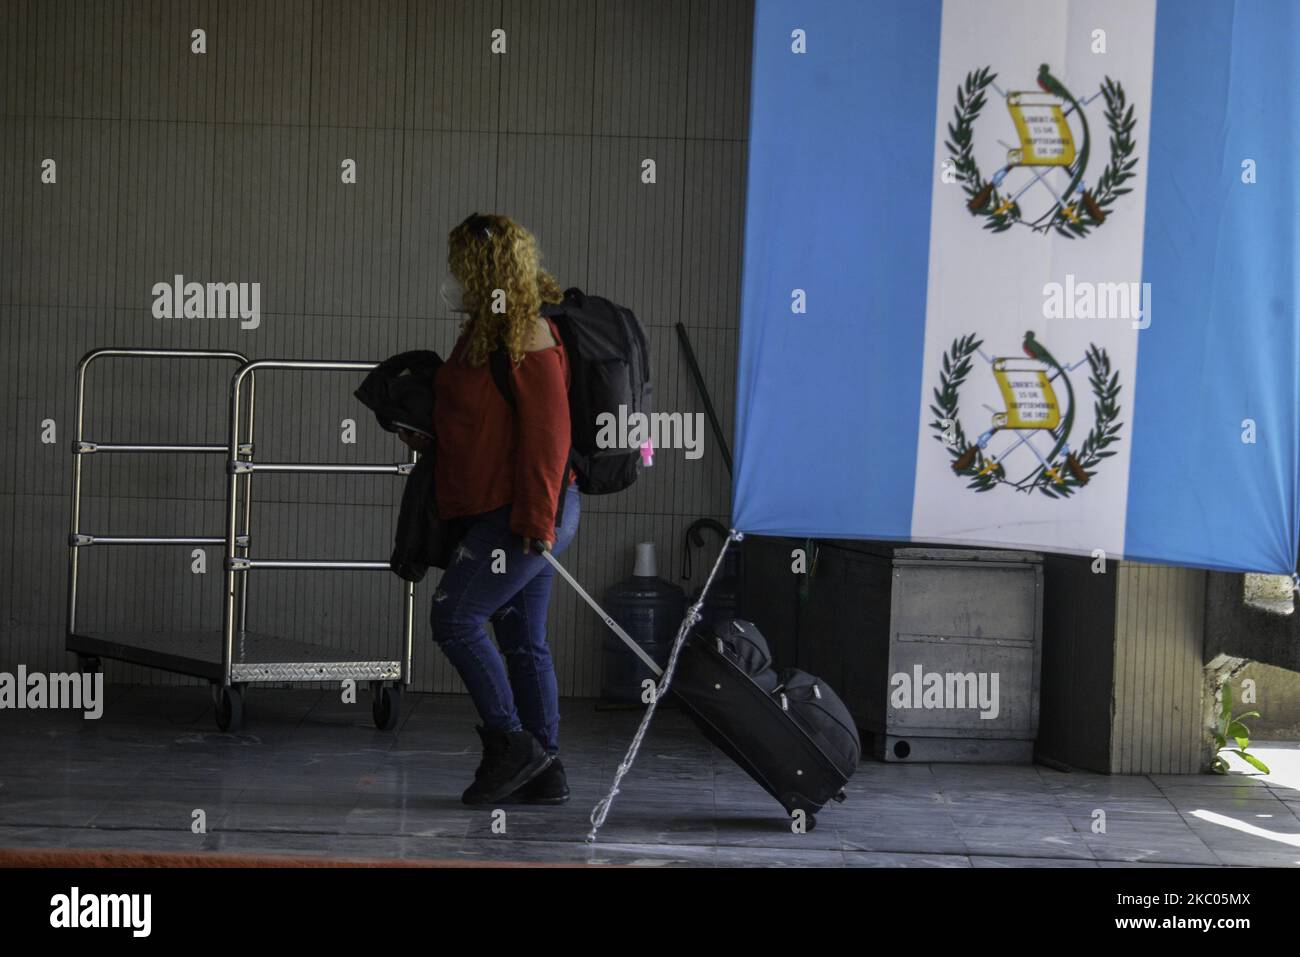 A traveler walks with her bags at La Aurora International Airport, in Guatemala City, Guatemala on Friday, September 18. The airport opens its international flight operations, and remained closed for 6 months to prevent the spread of COVID-19. During the pandemic, 84,344 people were infected and 3,076 died. (Photo by Deccio Serrano/NurPhoto) Stock Photo